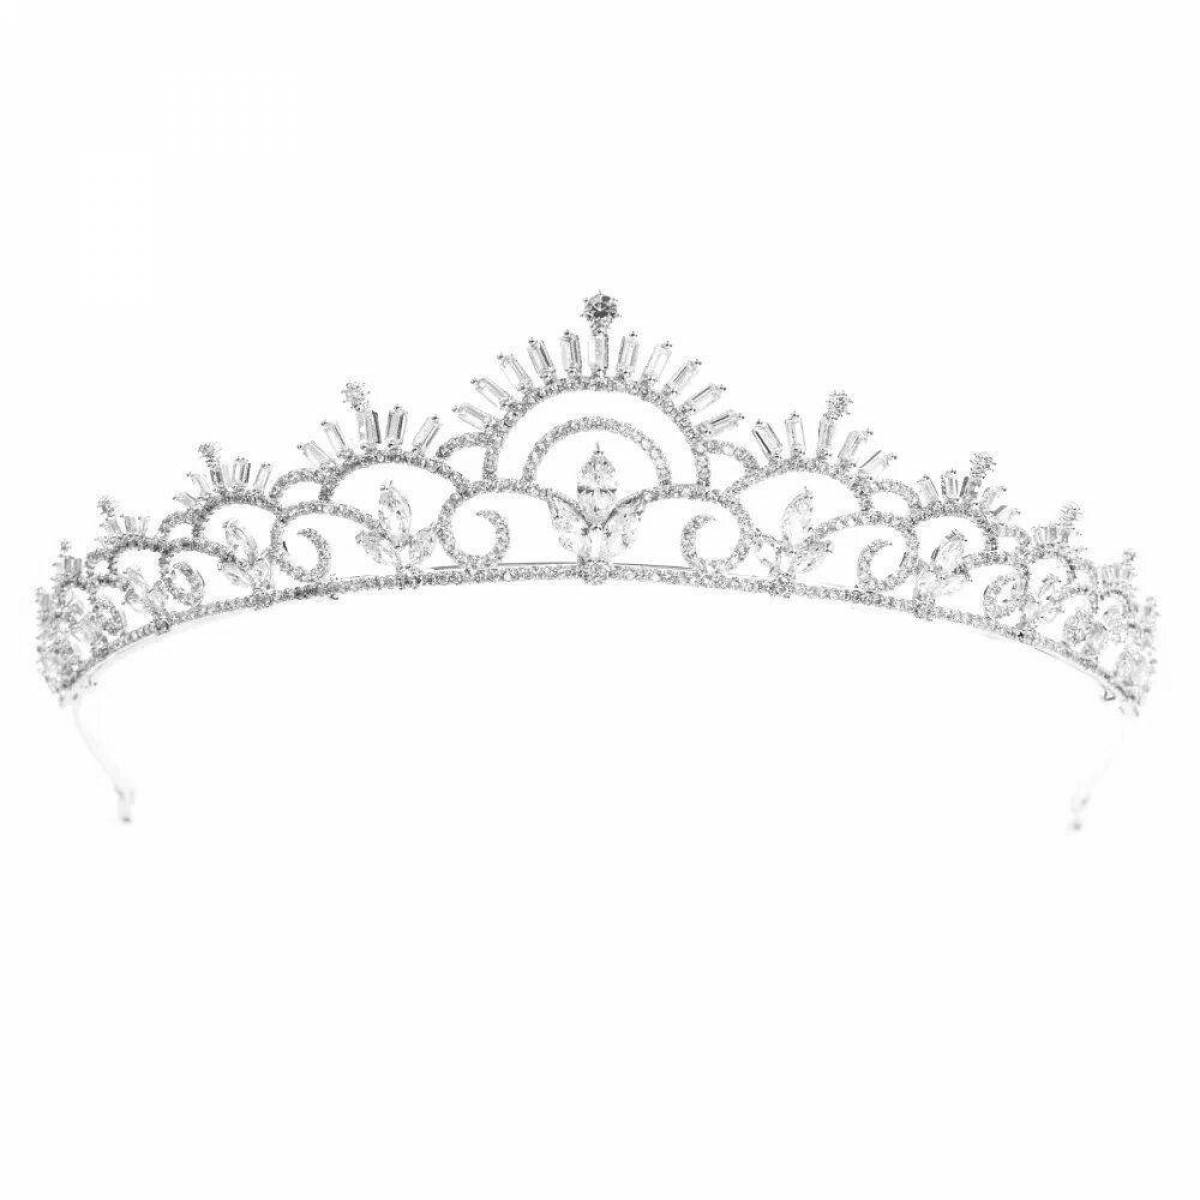 Majestic diadem coloring page